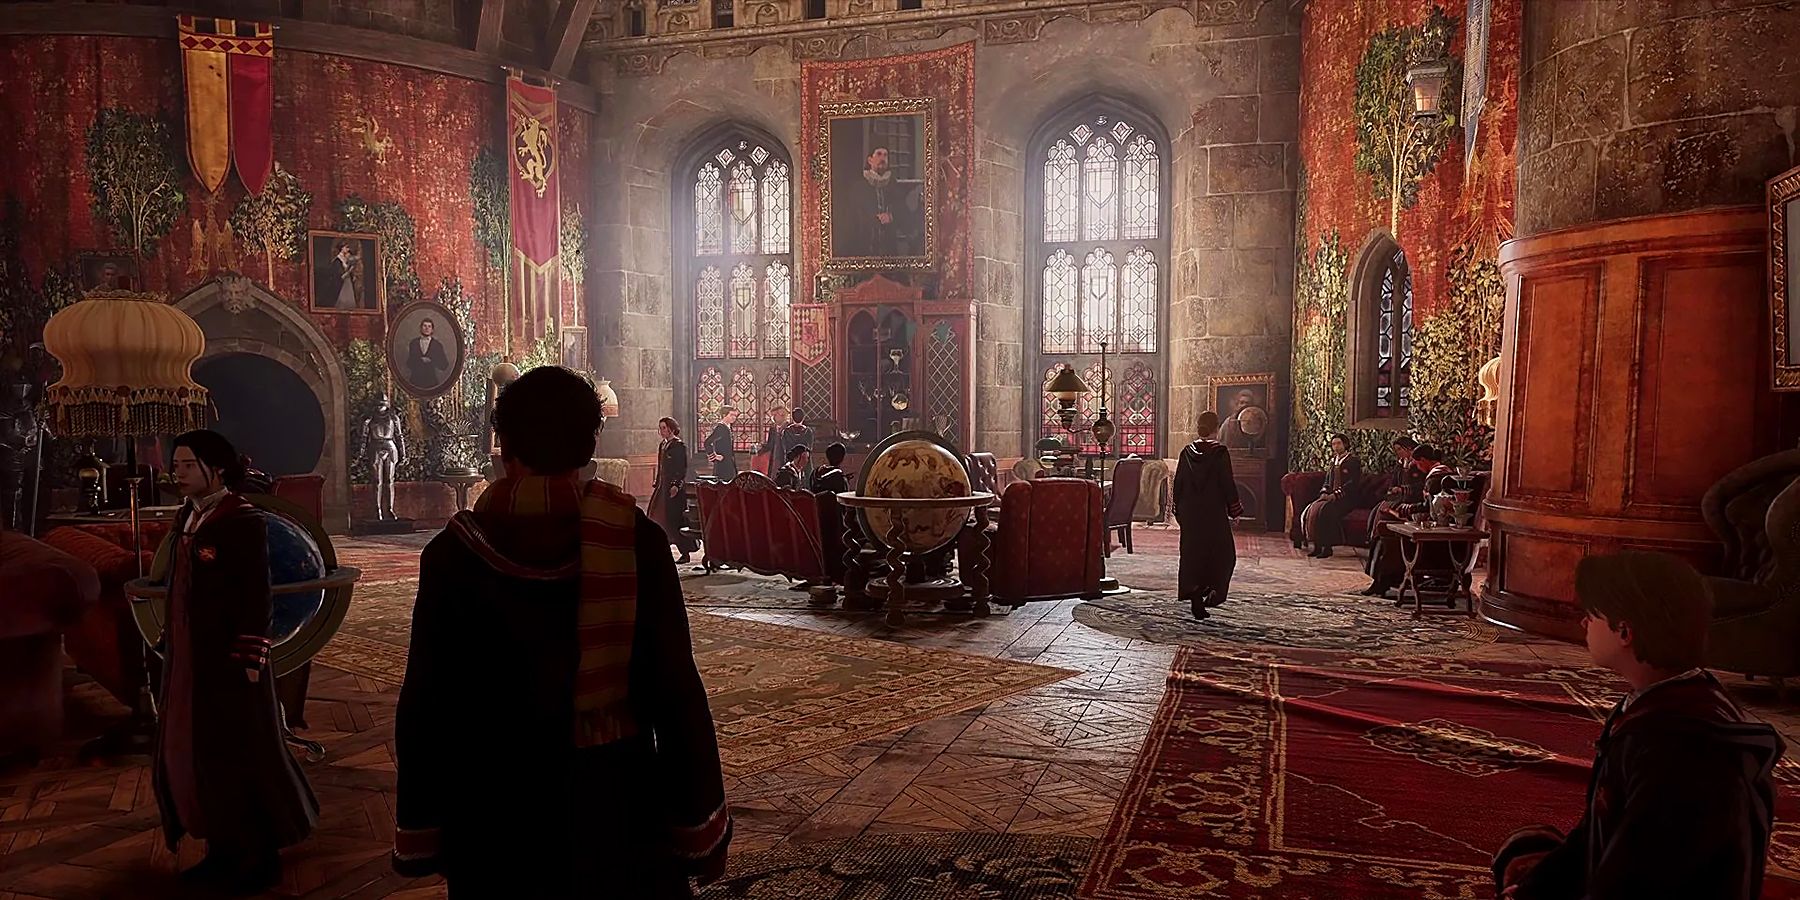 Hogwarts Legacy Smashes Twitch Viewership Record for a Single-Player Game -  Fextralife